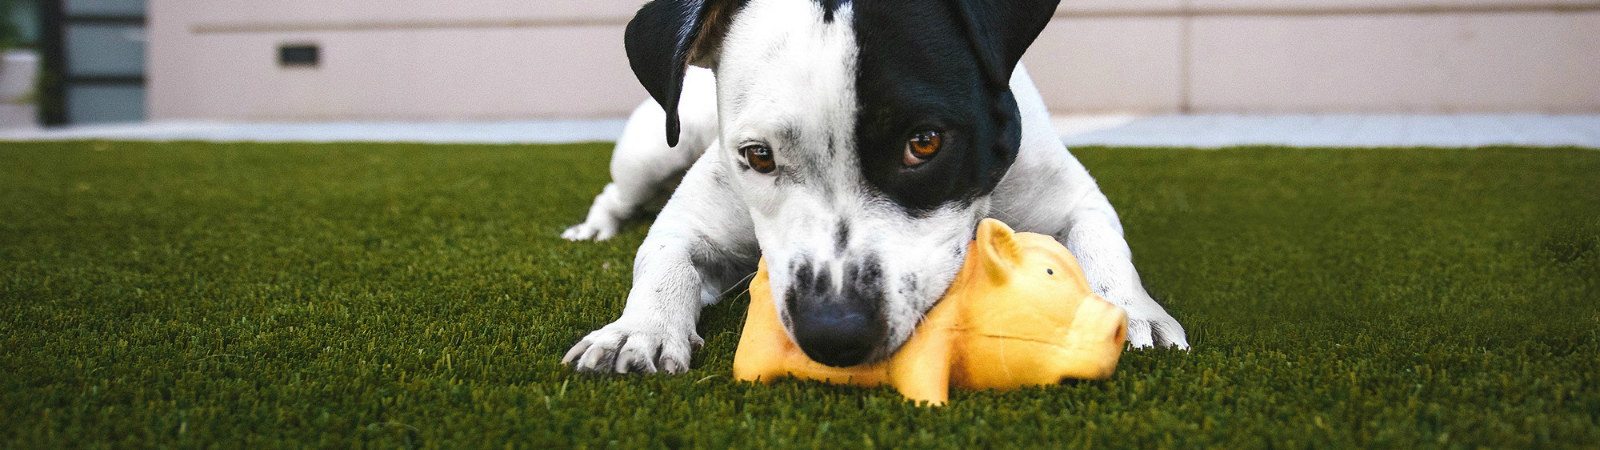 We promise to leave your residential nice and neat. Picture of a black and white dog chewing a yellow cow toy on a nice clean lawn.